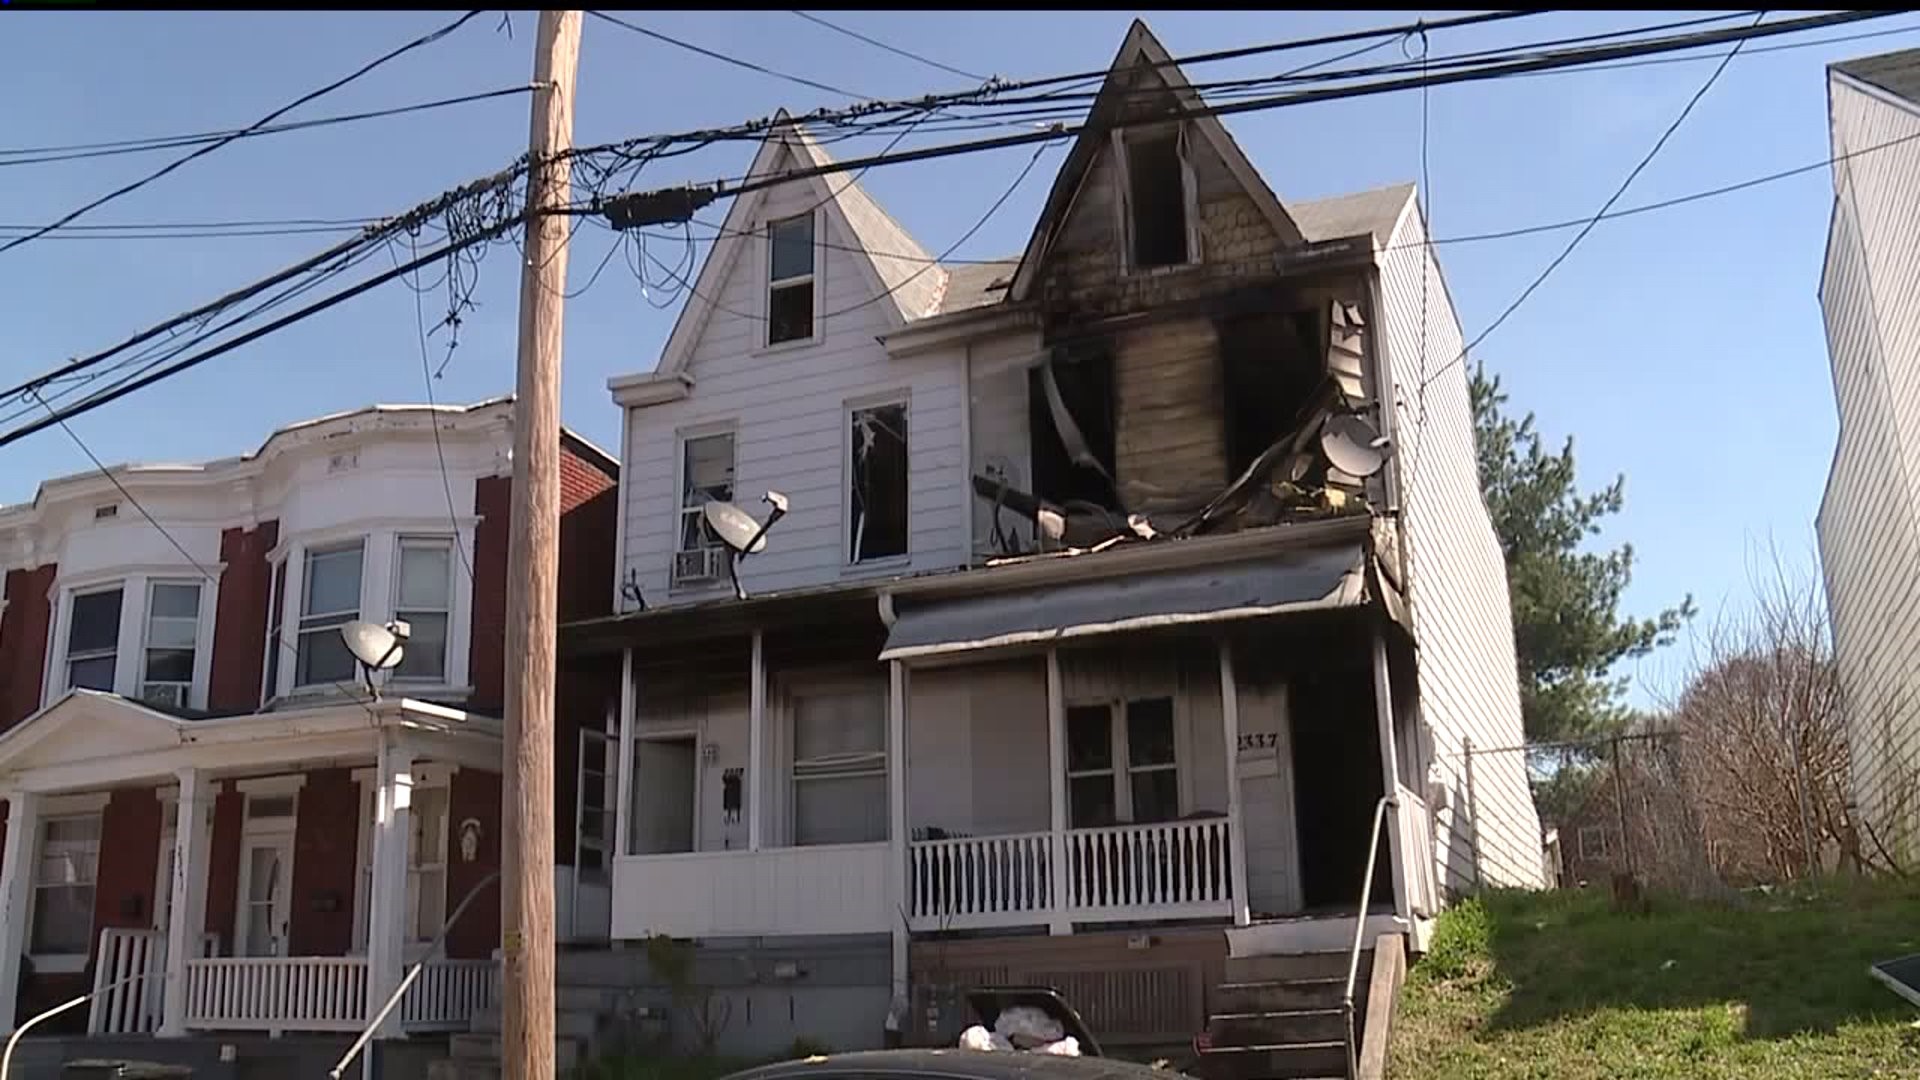 Toddler killed in Harrisburg house fire, two firefighters injured